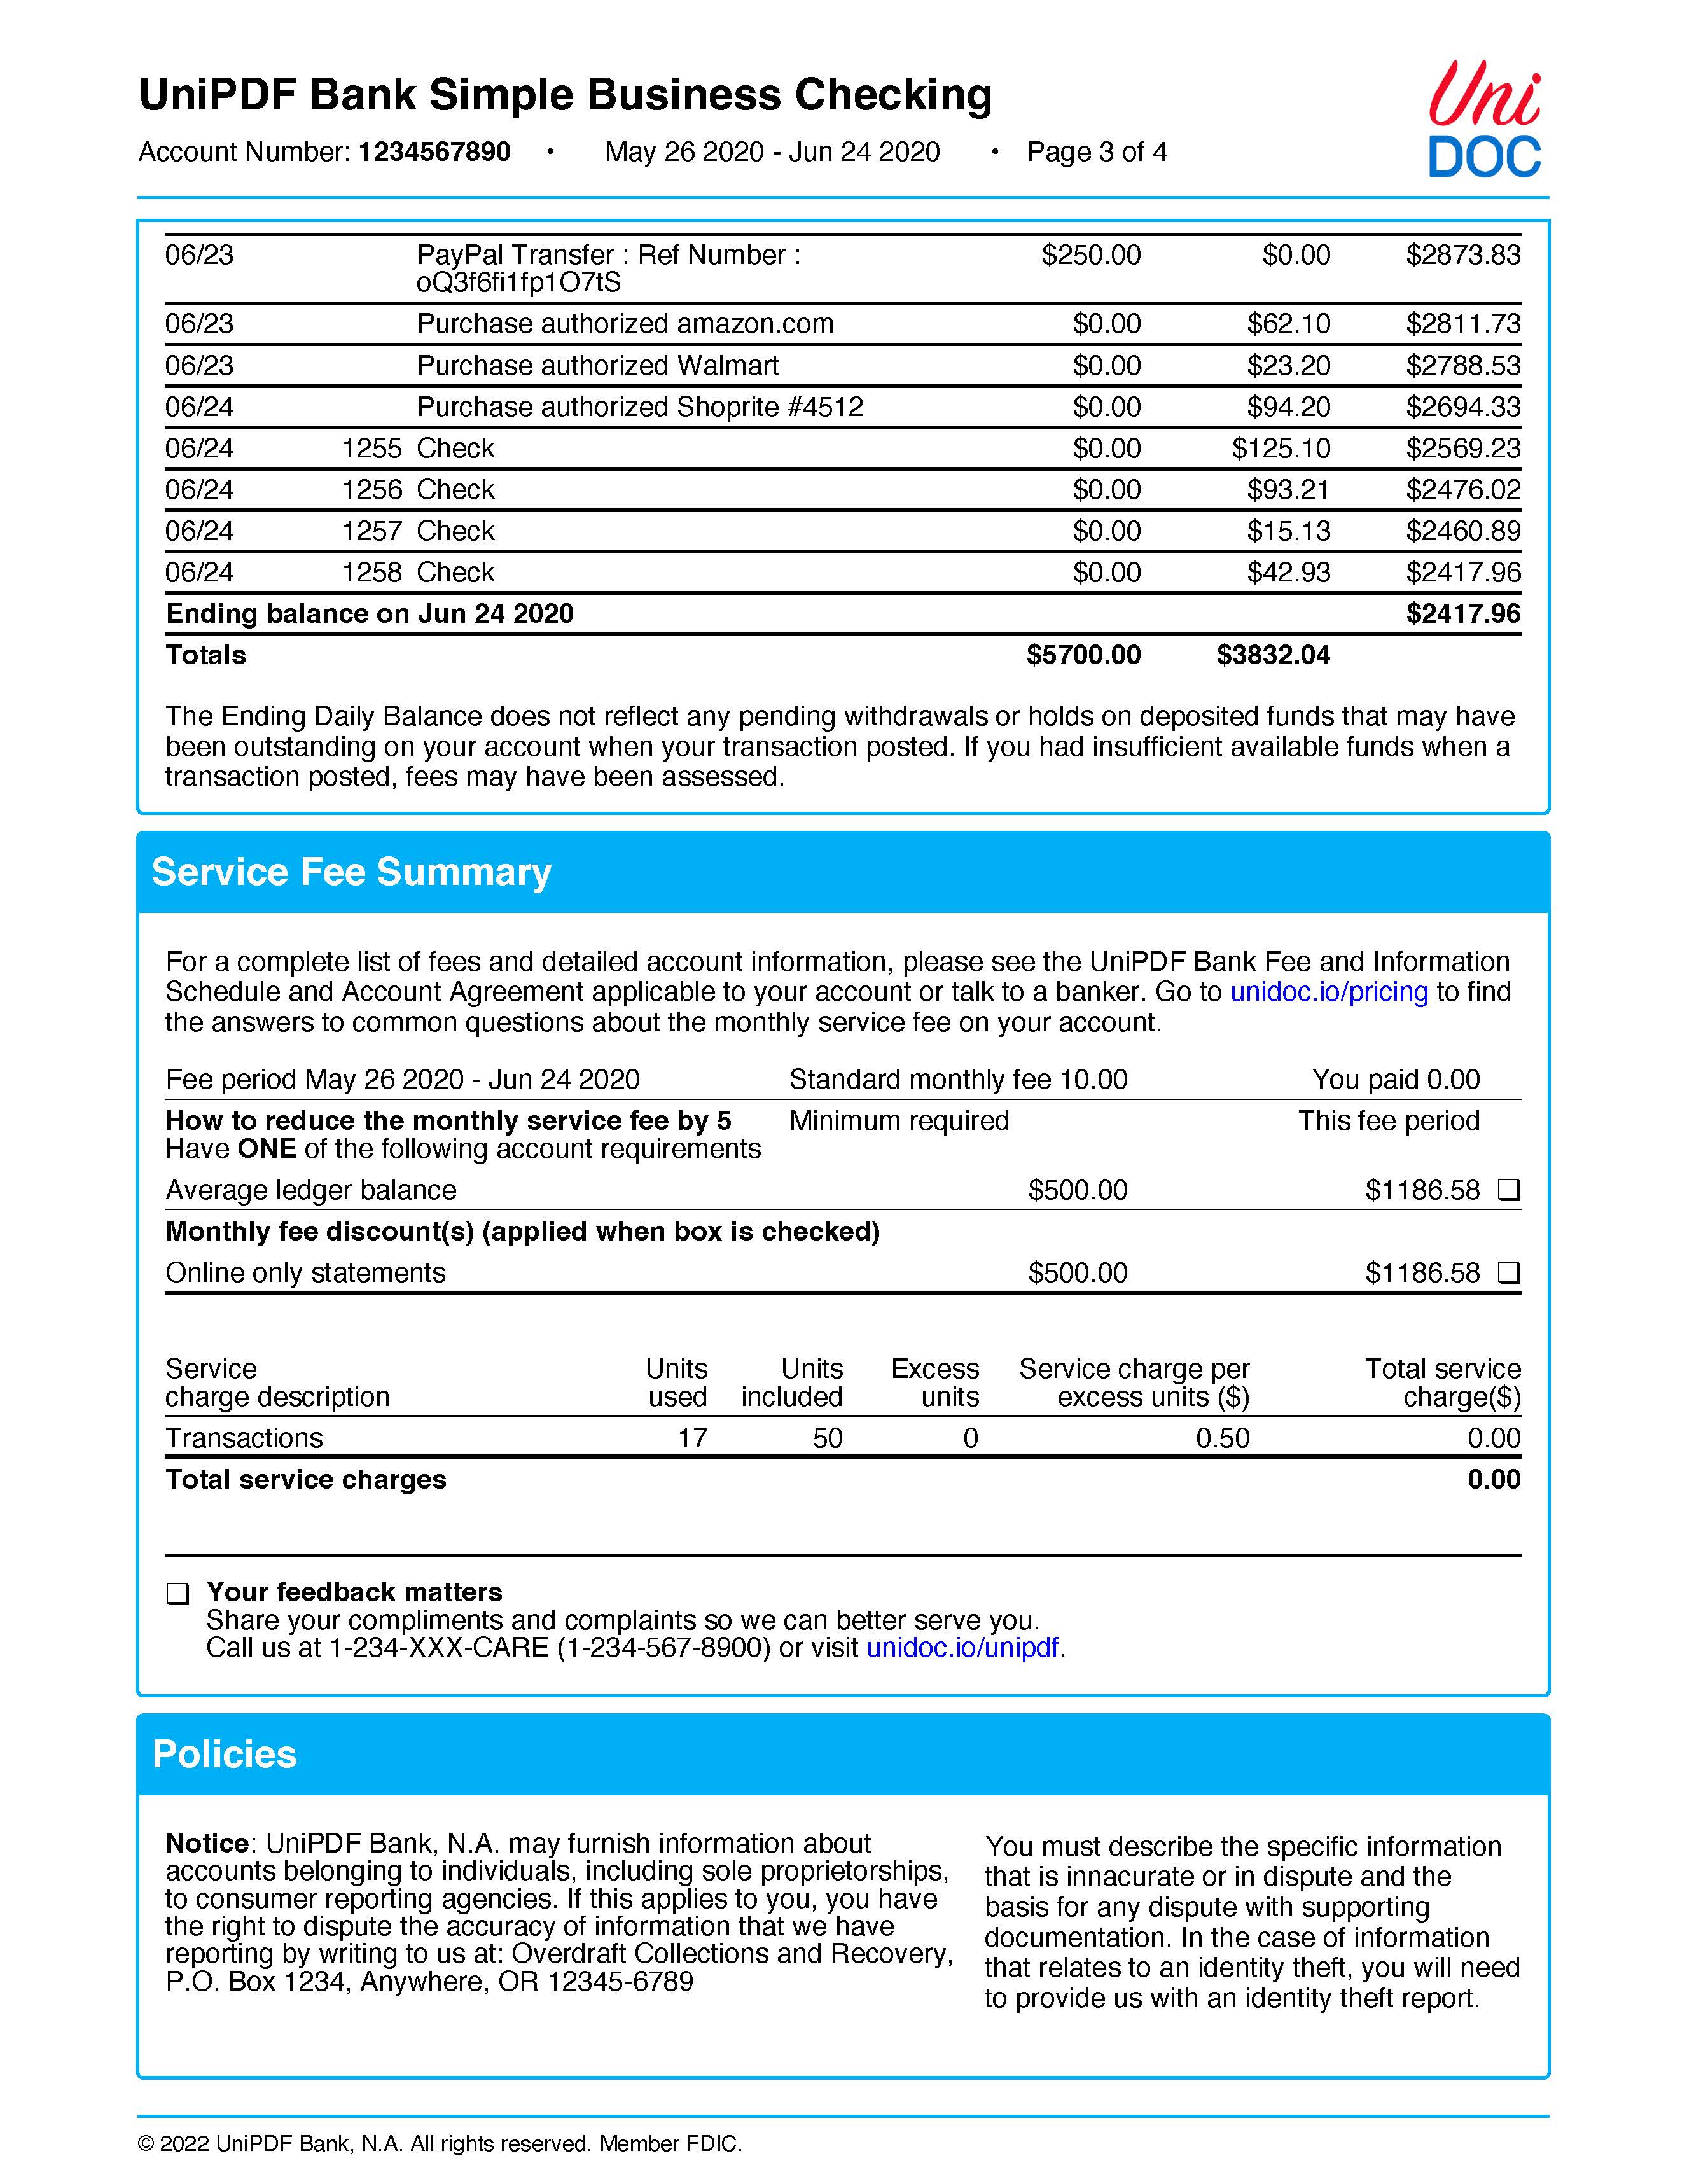 Billing statement example with UniPDF